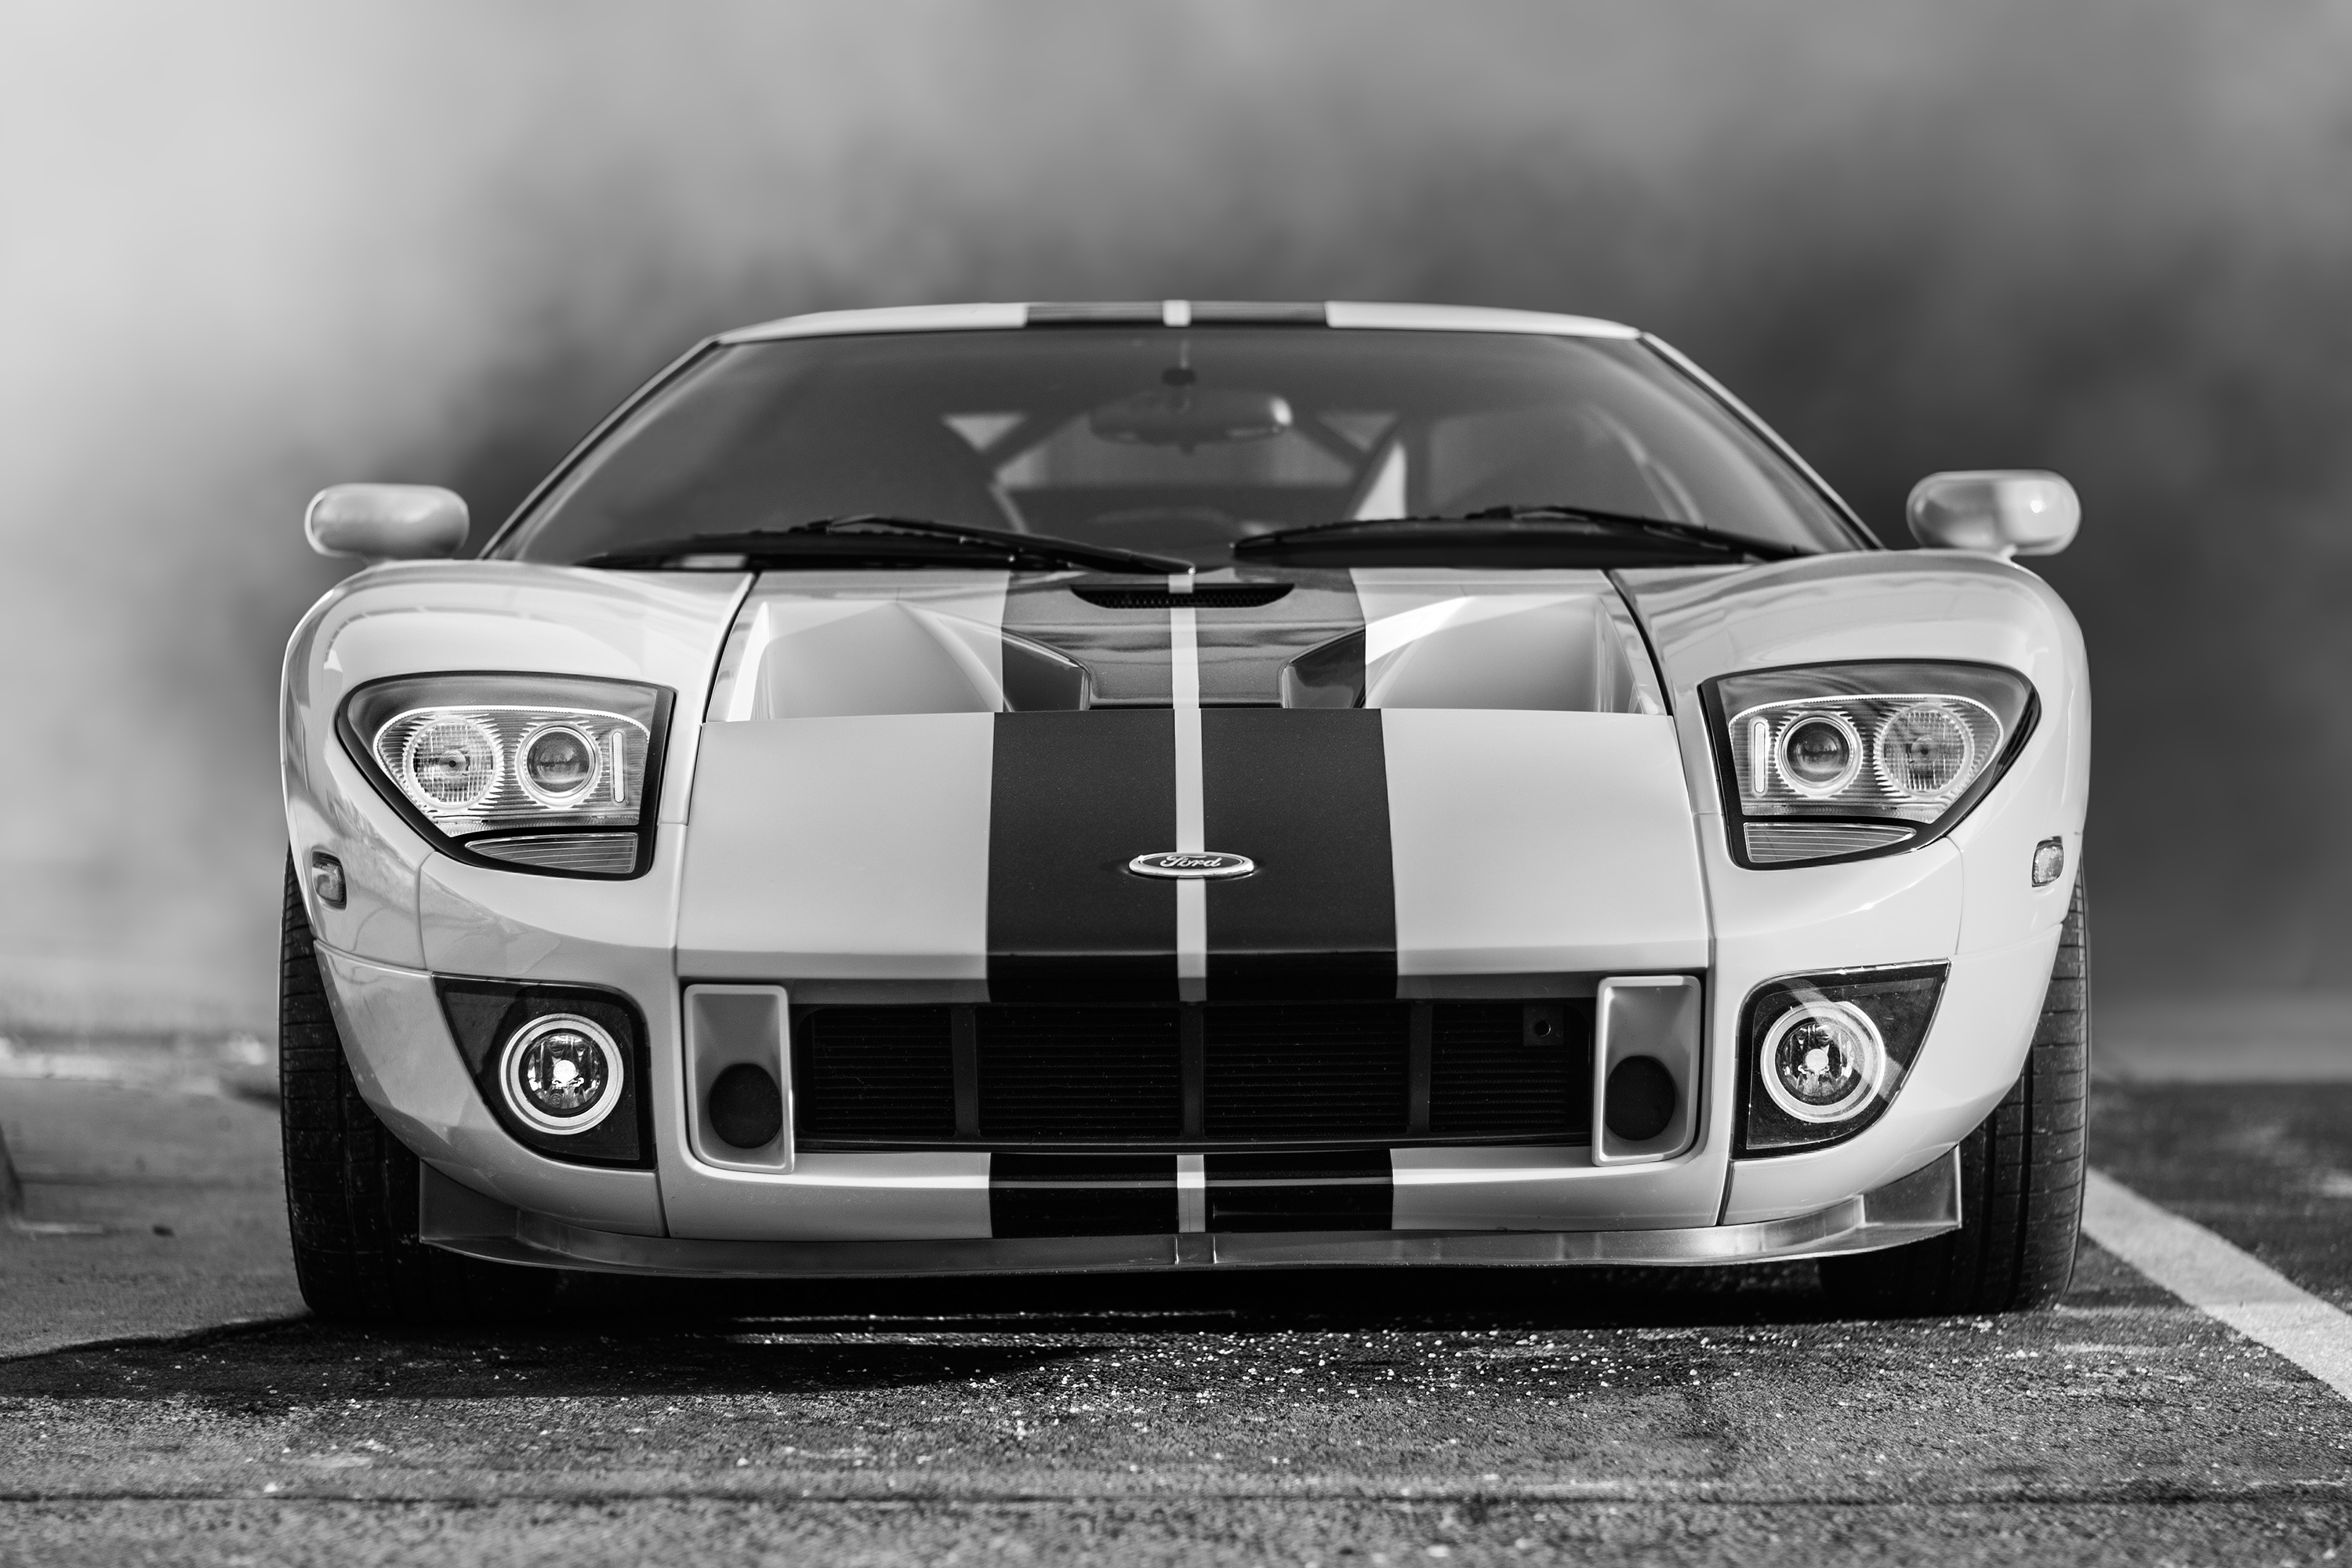 bw, headlights, lights, chb download for free